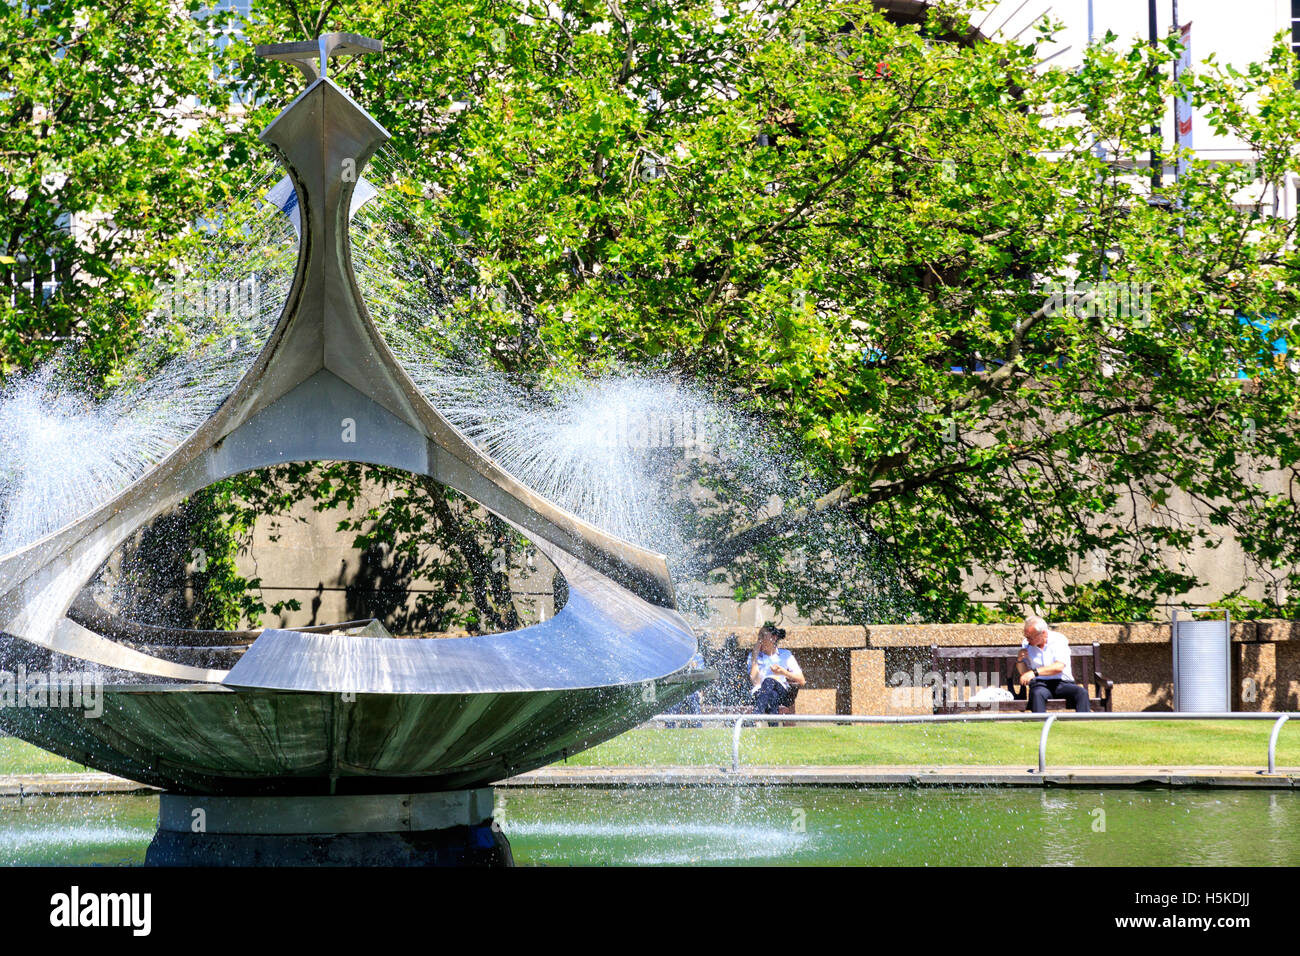 London, UK - July 19, 2016 - The fountain, named as Revolving Torsion, in Gabo Fountain Garden at St Thomas’s Hospital in London Stock Photo